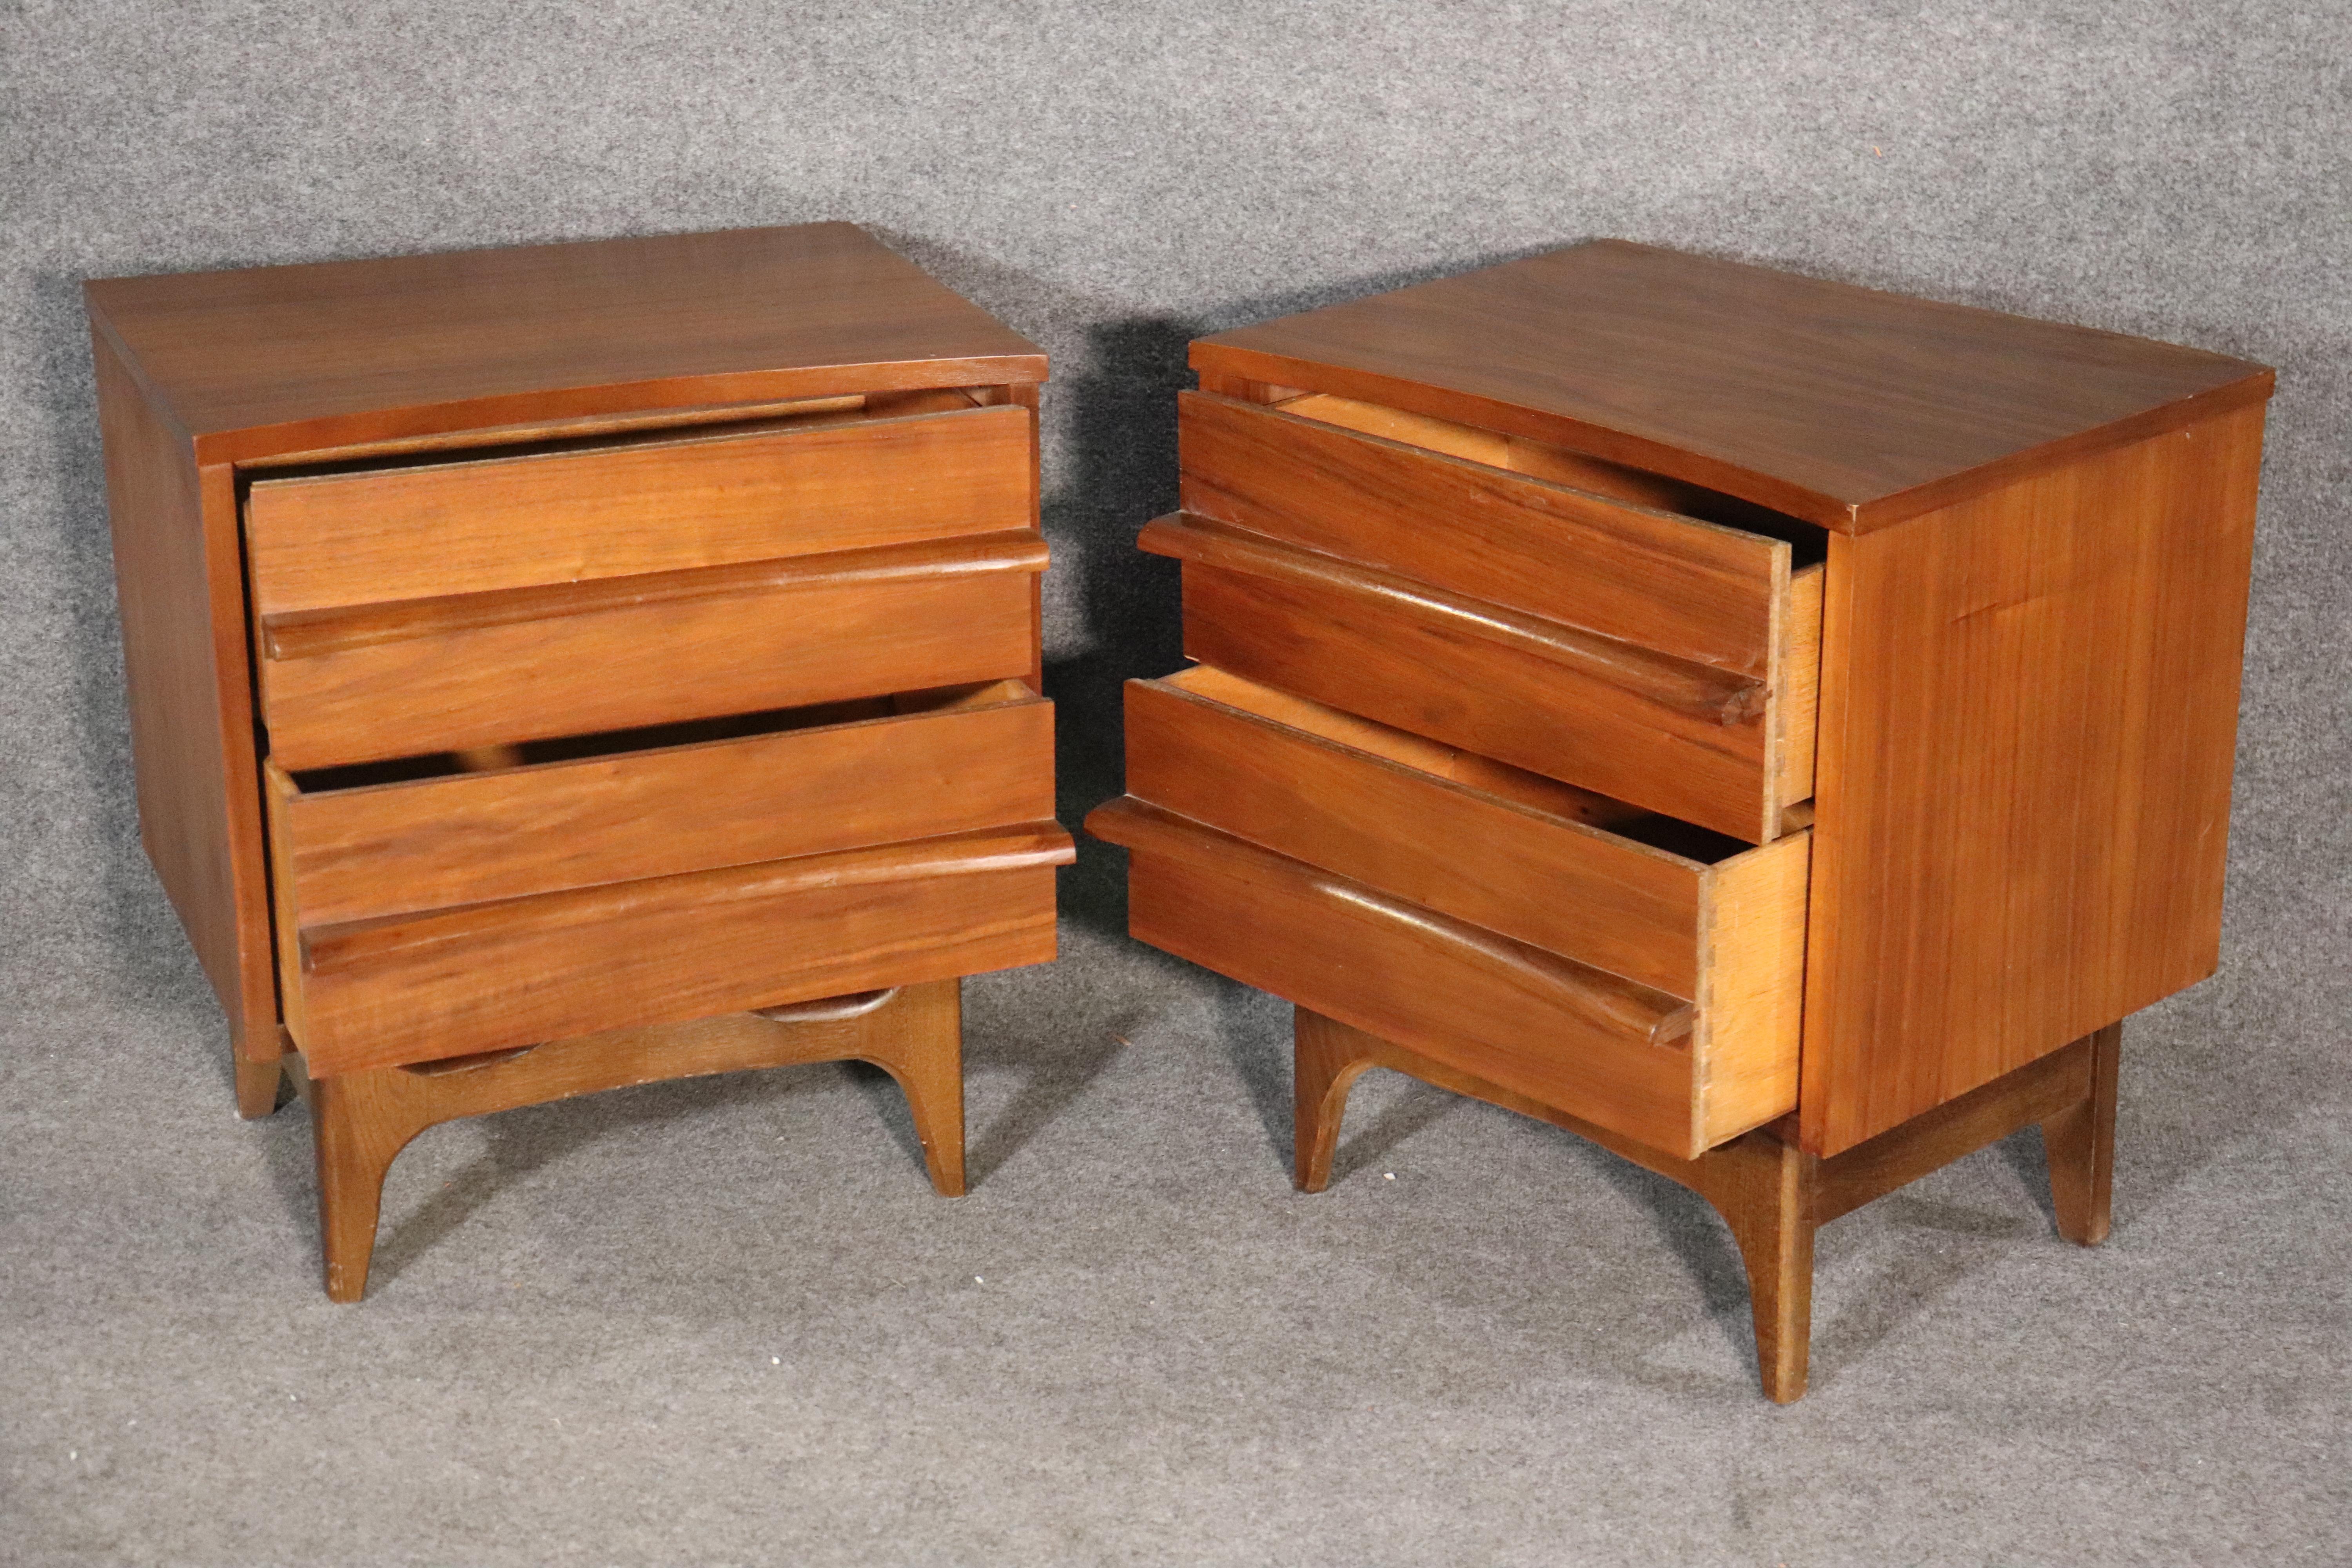 Pair of bedside tables with concave drawers. Great Mid-Century Modern design from Young Manufacturing Company.
Please confirm location NY or NJ.